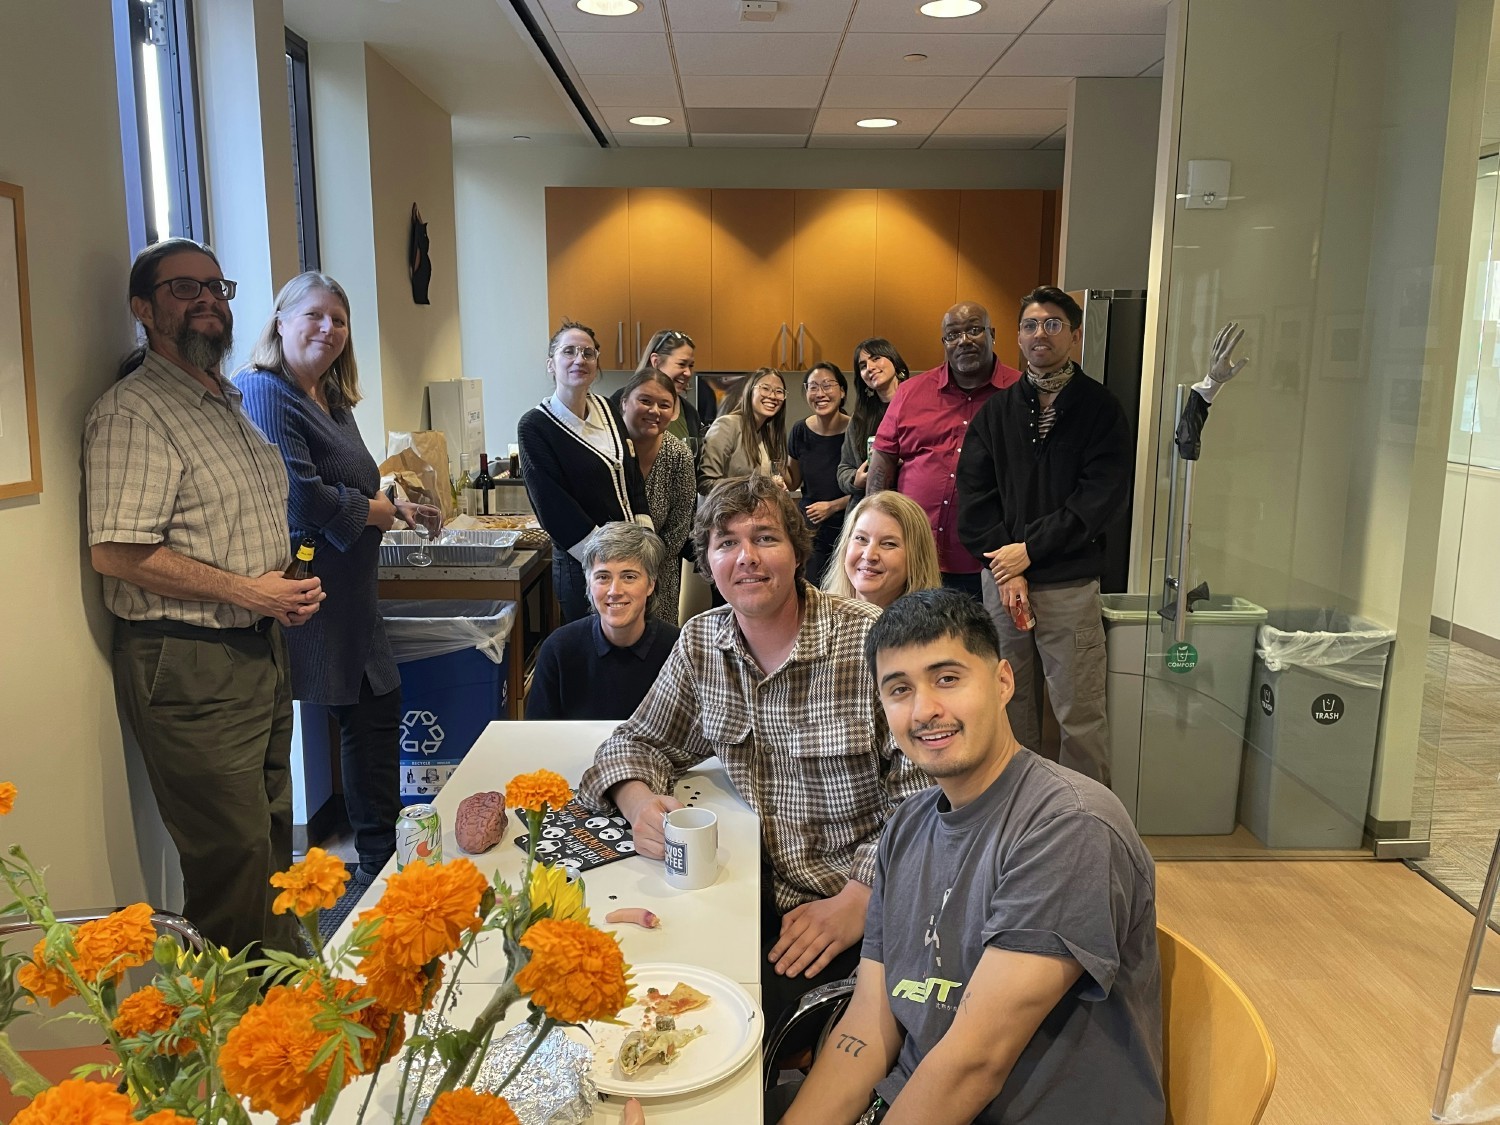 Halloween celebration.
Staff gathered to celebrate Halloween and Día De Los Muertos at our San Francisco office.